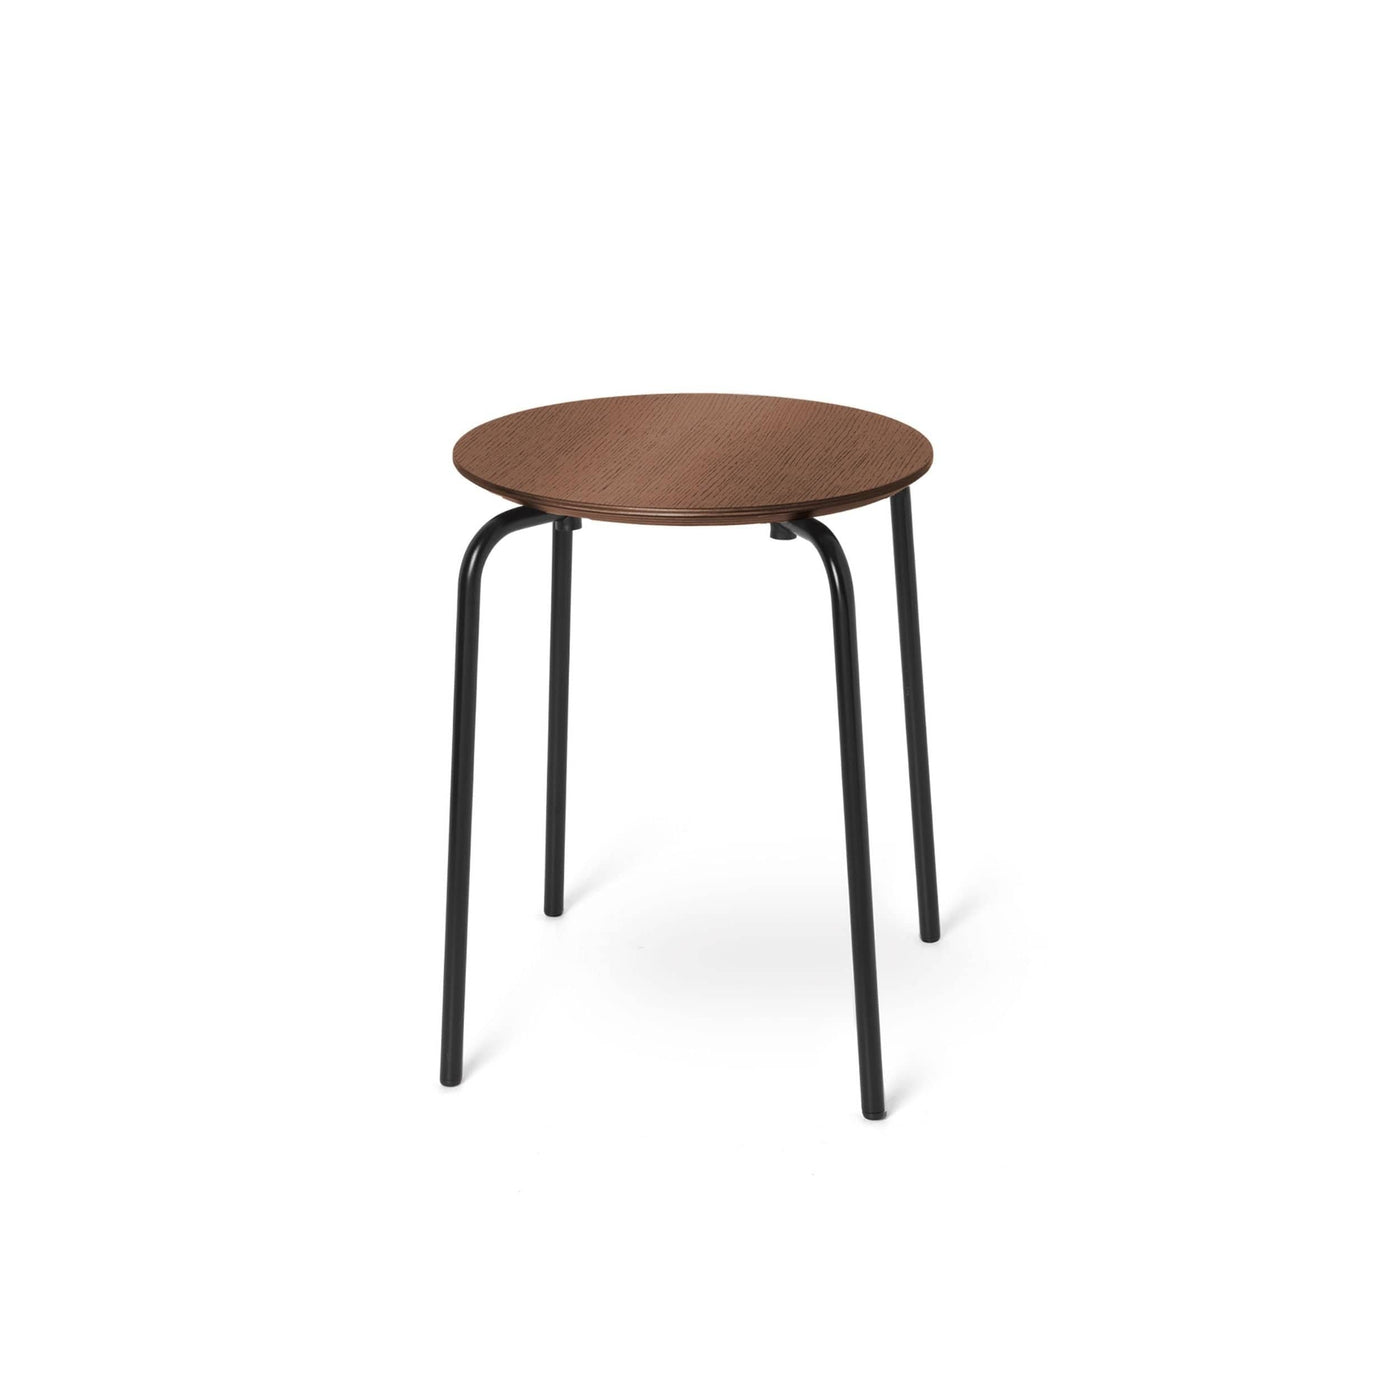 ferm living herman stool in walnut with black legs. Available from someday designs. #colour_walnut